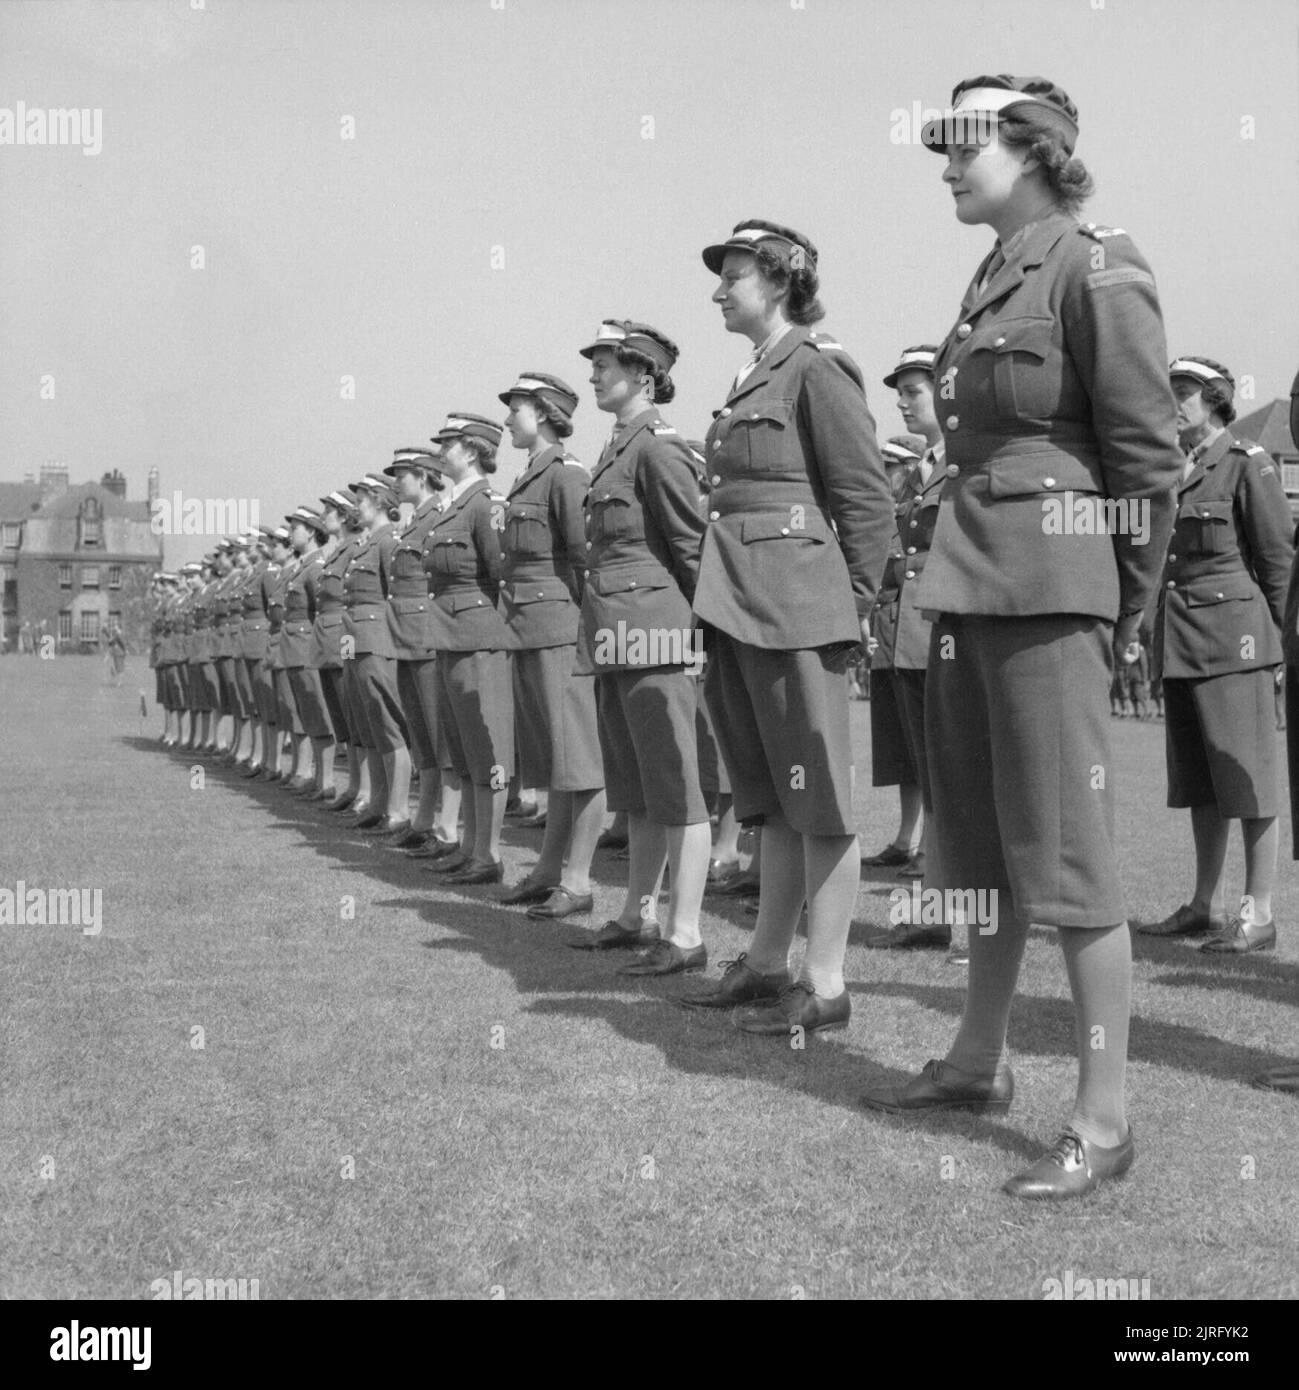 The British Army in the United Kingdom 1939-1945- the Auxiliary Territorial Service ATS girls on parade at an officer cadet training unit at Craigmillar, Edinburgh, Scotland. Stock Photo